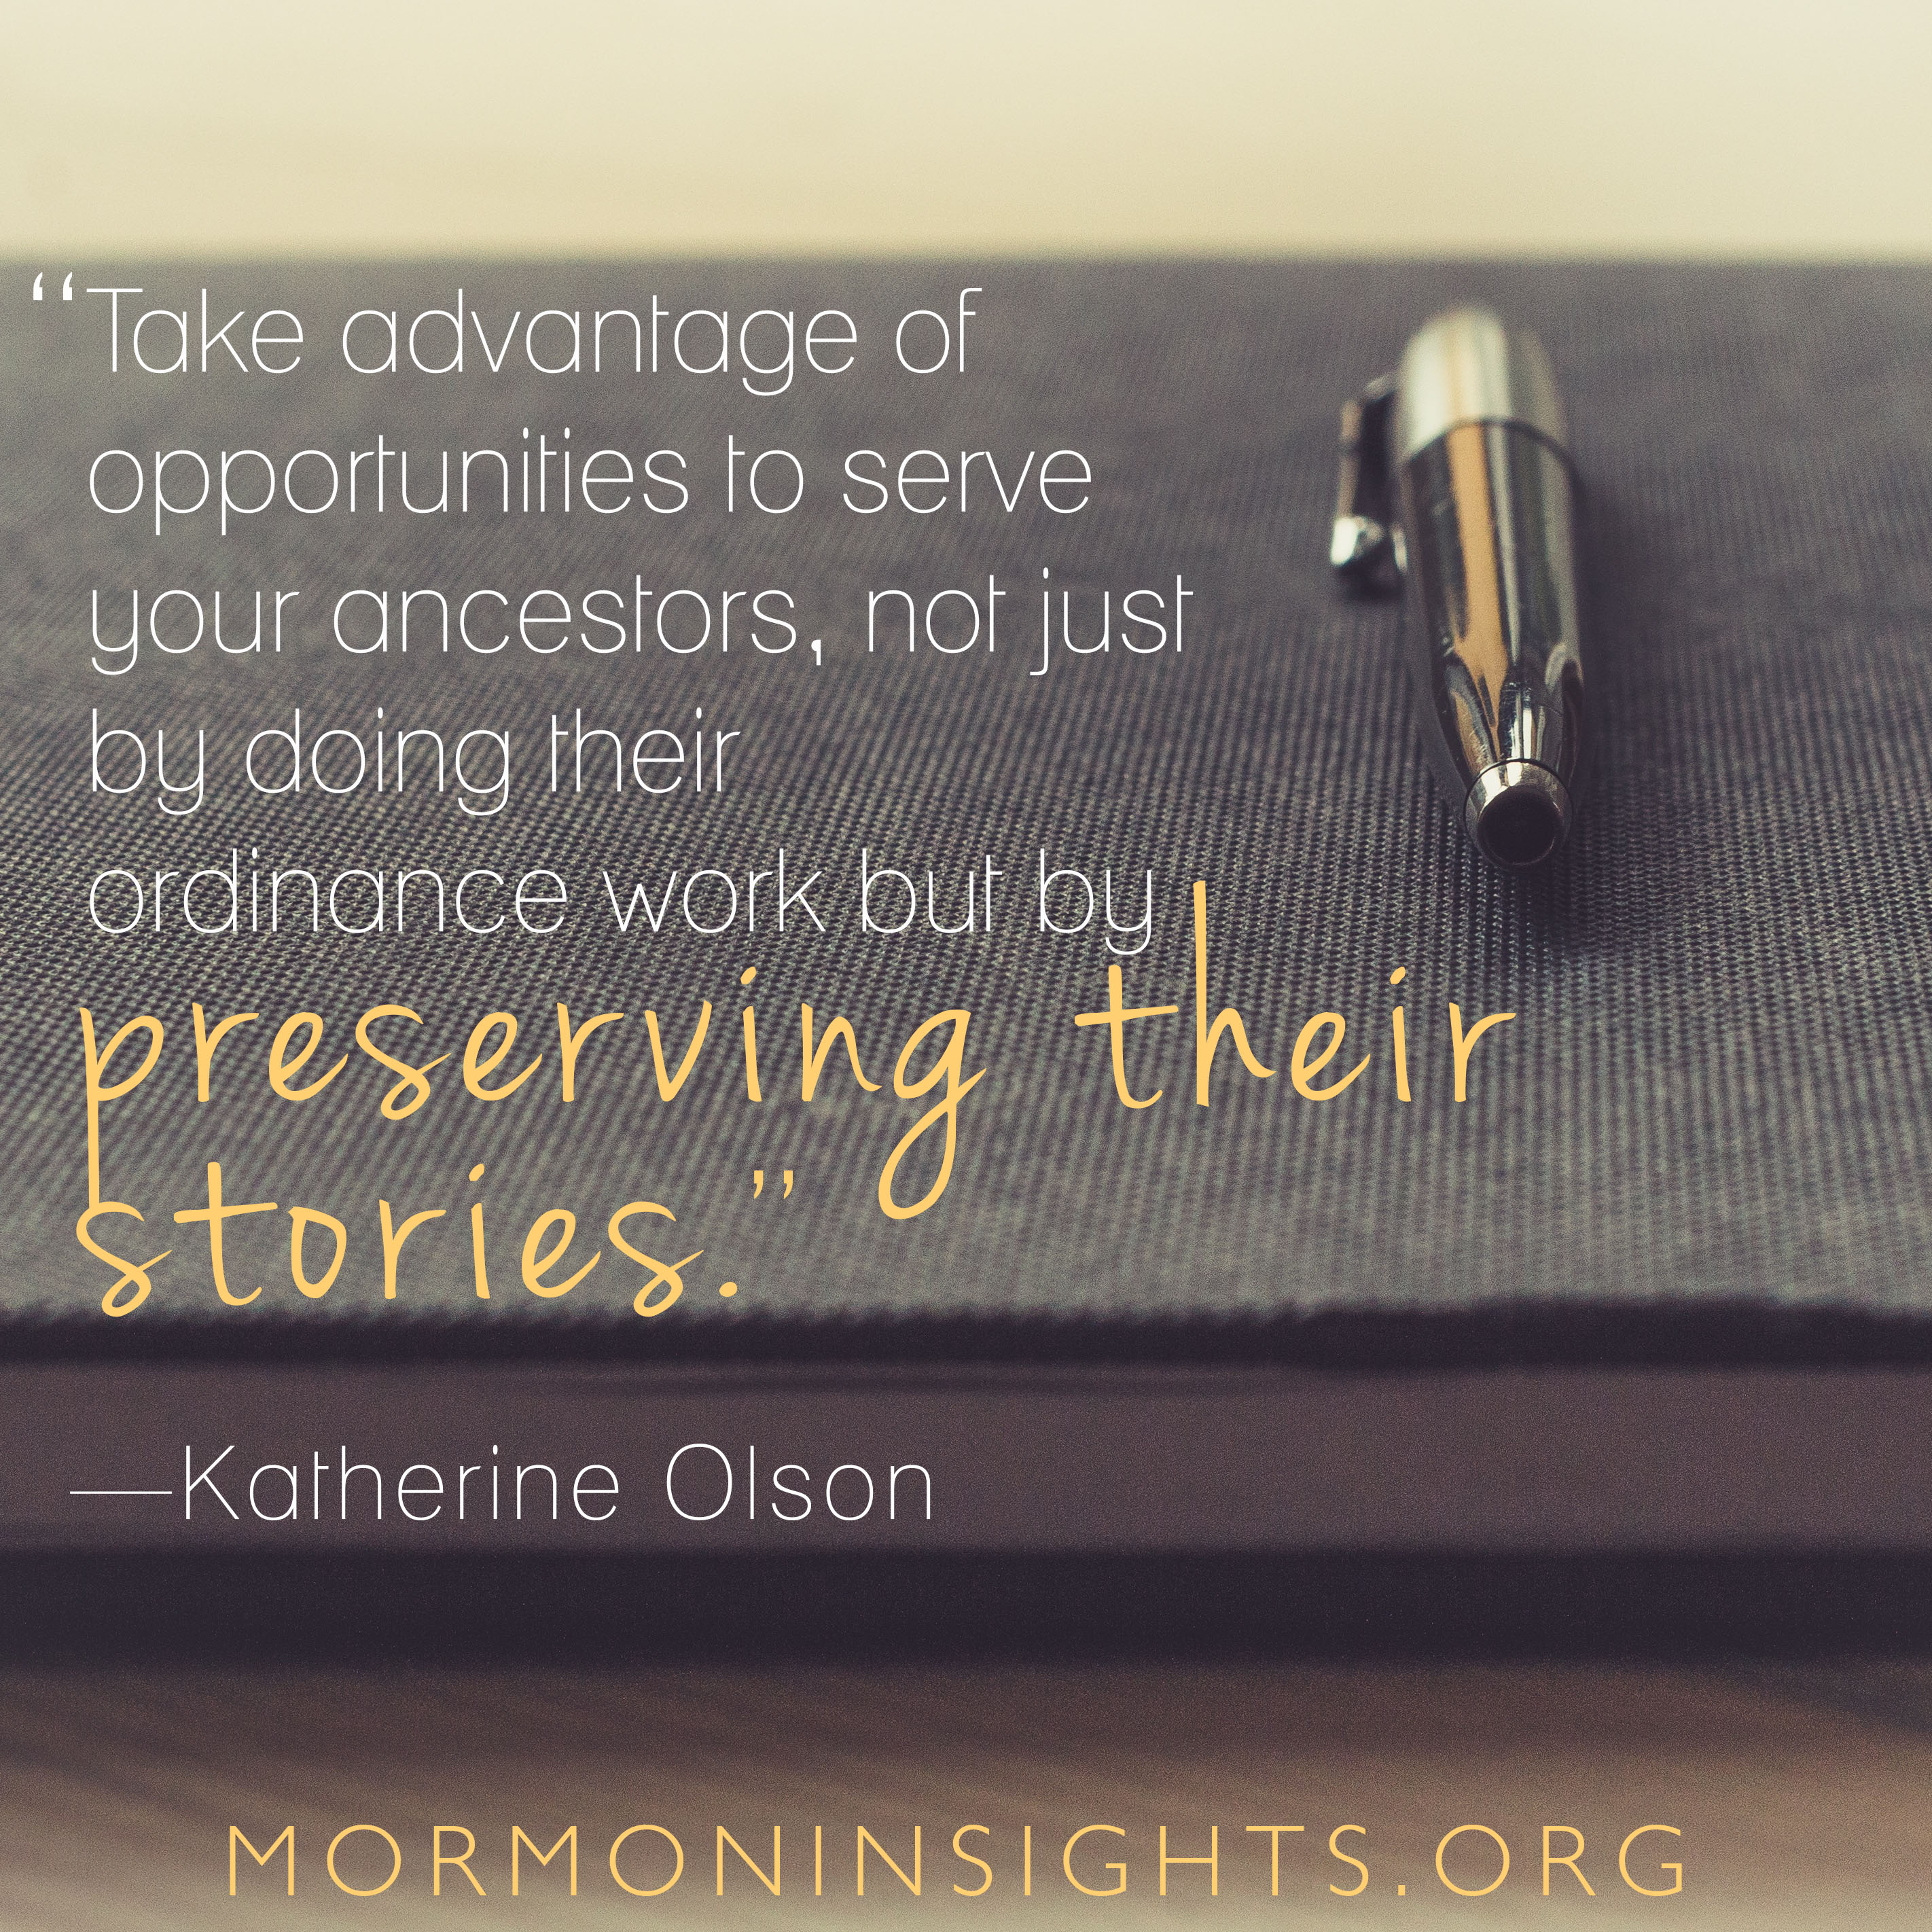 "Take advantages of opportunities to serve your ancestors, not just by doing their ordinance work but by preserving their stories." -Katherine Olson